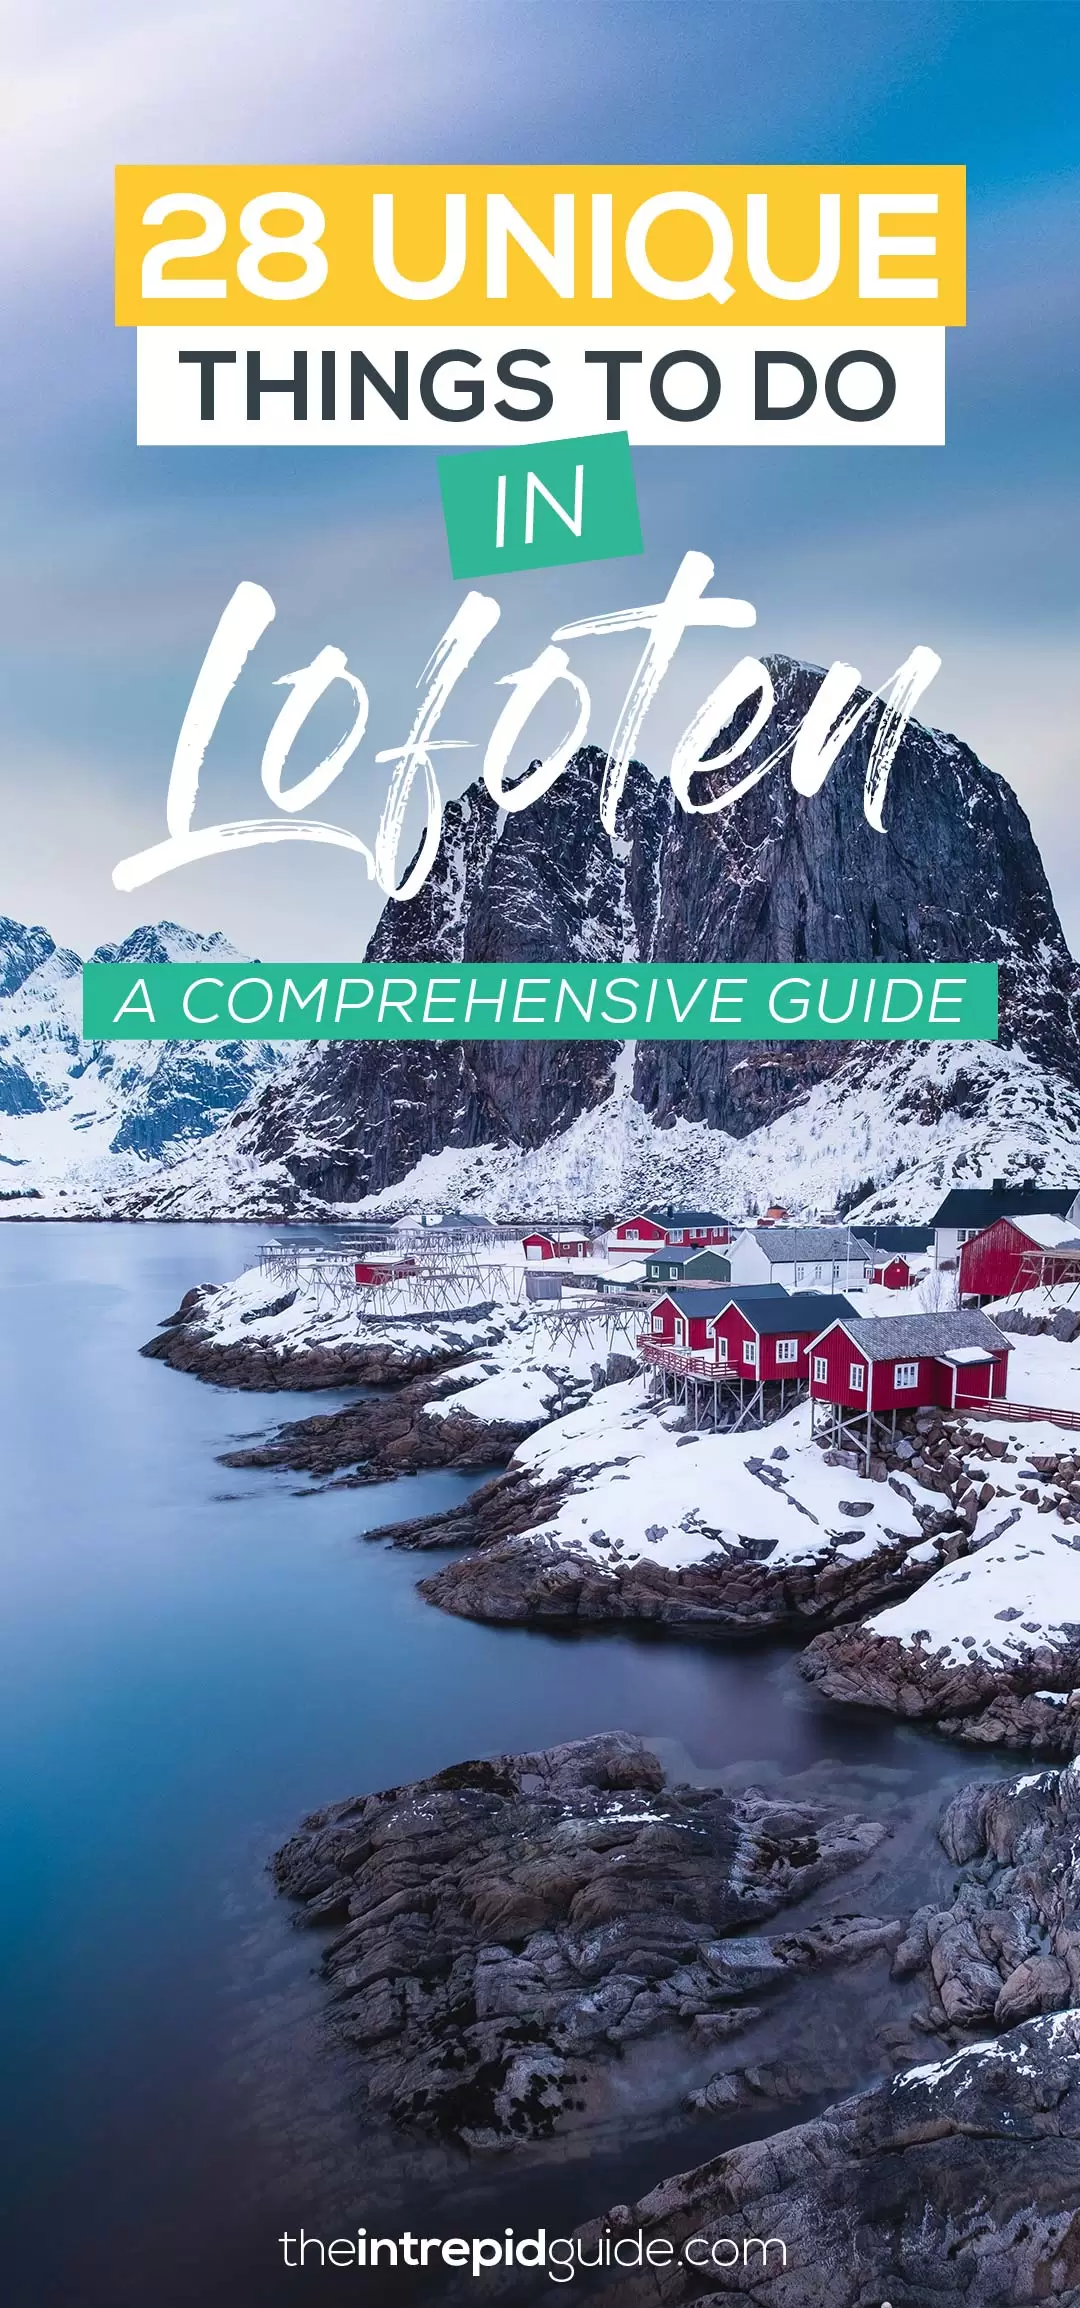 28 Unique Things to Do in Lofoten : A Comprehensive Guide